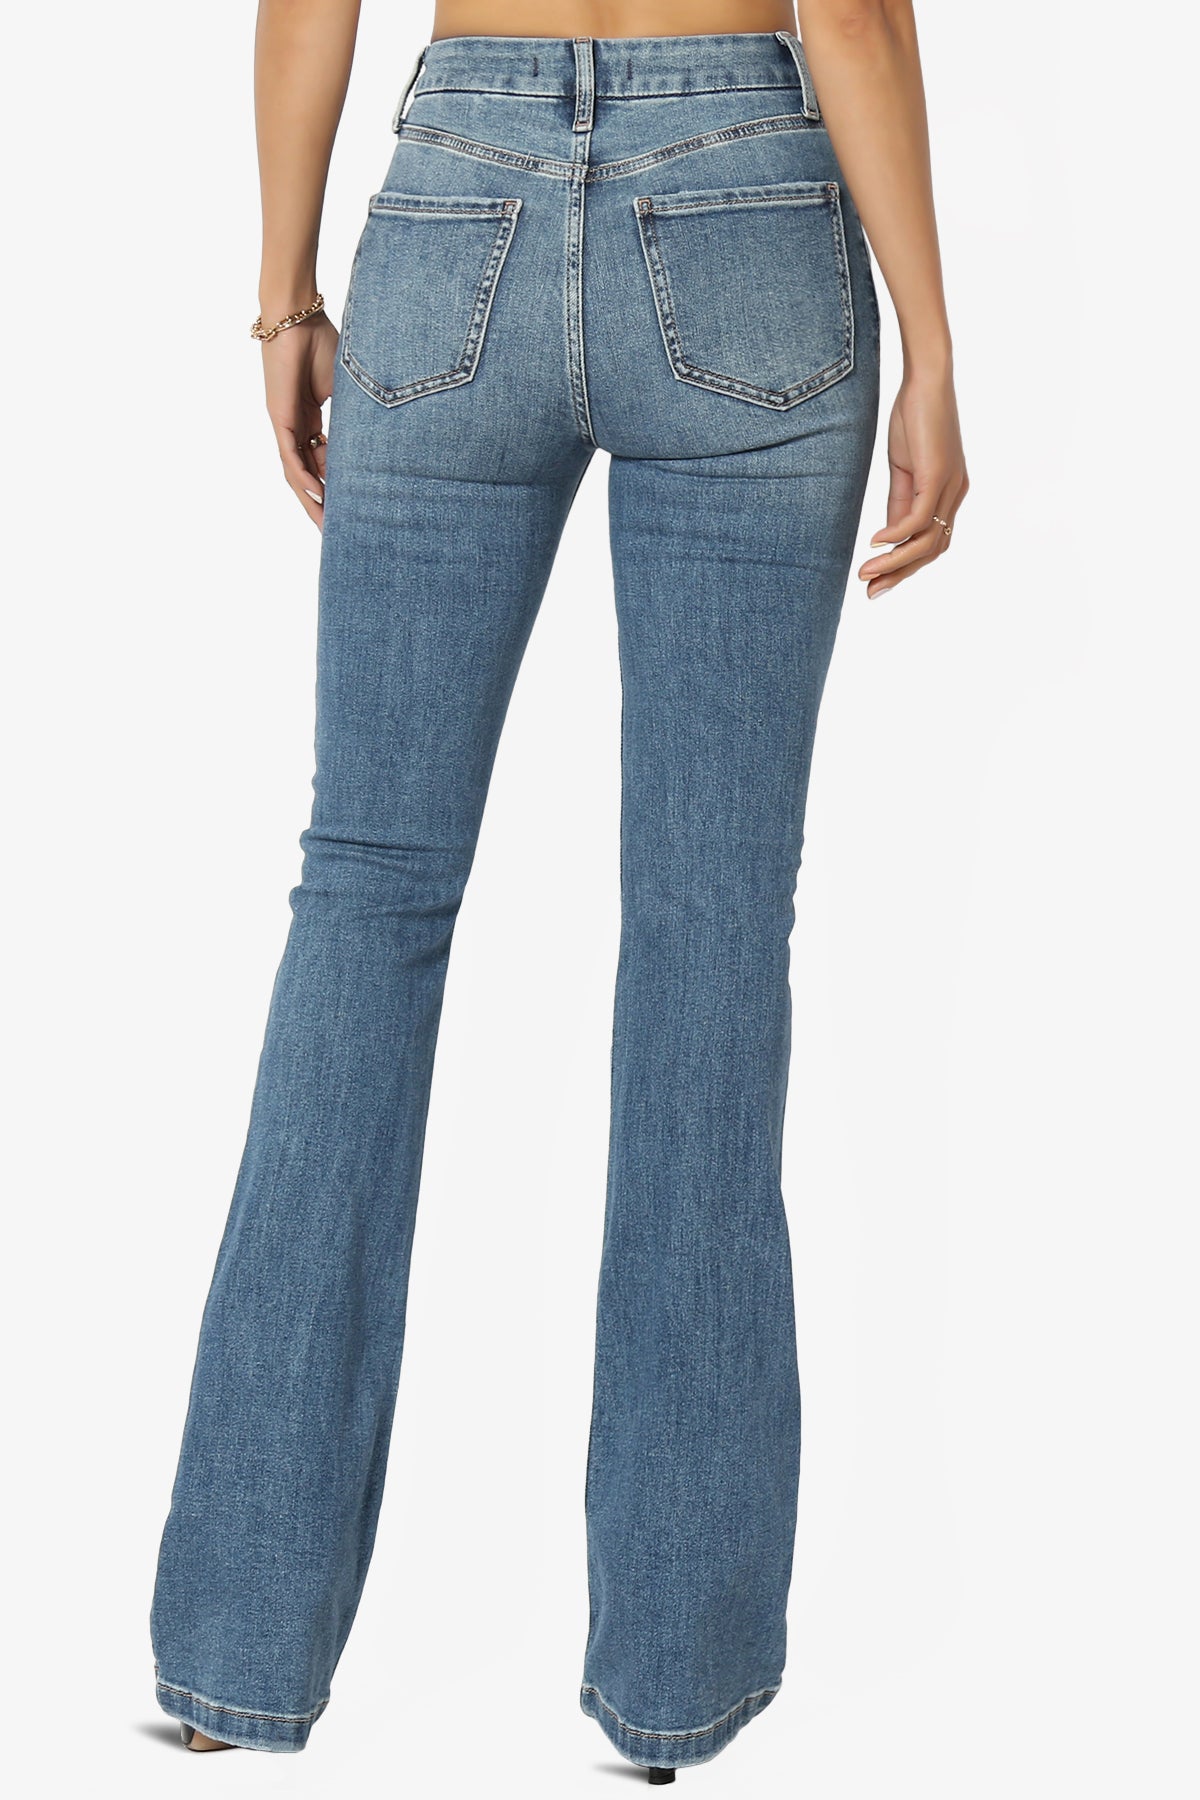 Aliyah Super High Rise Flare Jeans in LIVLY MEDIUM_2